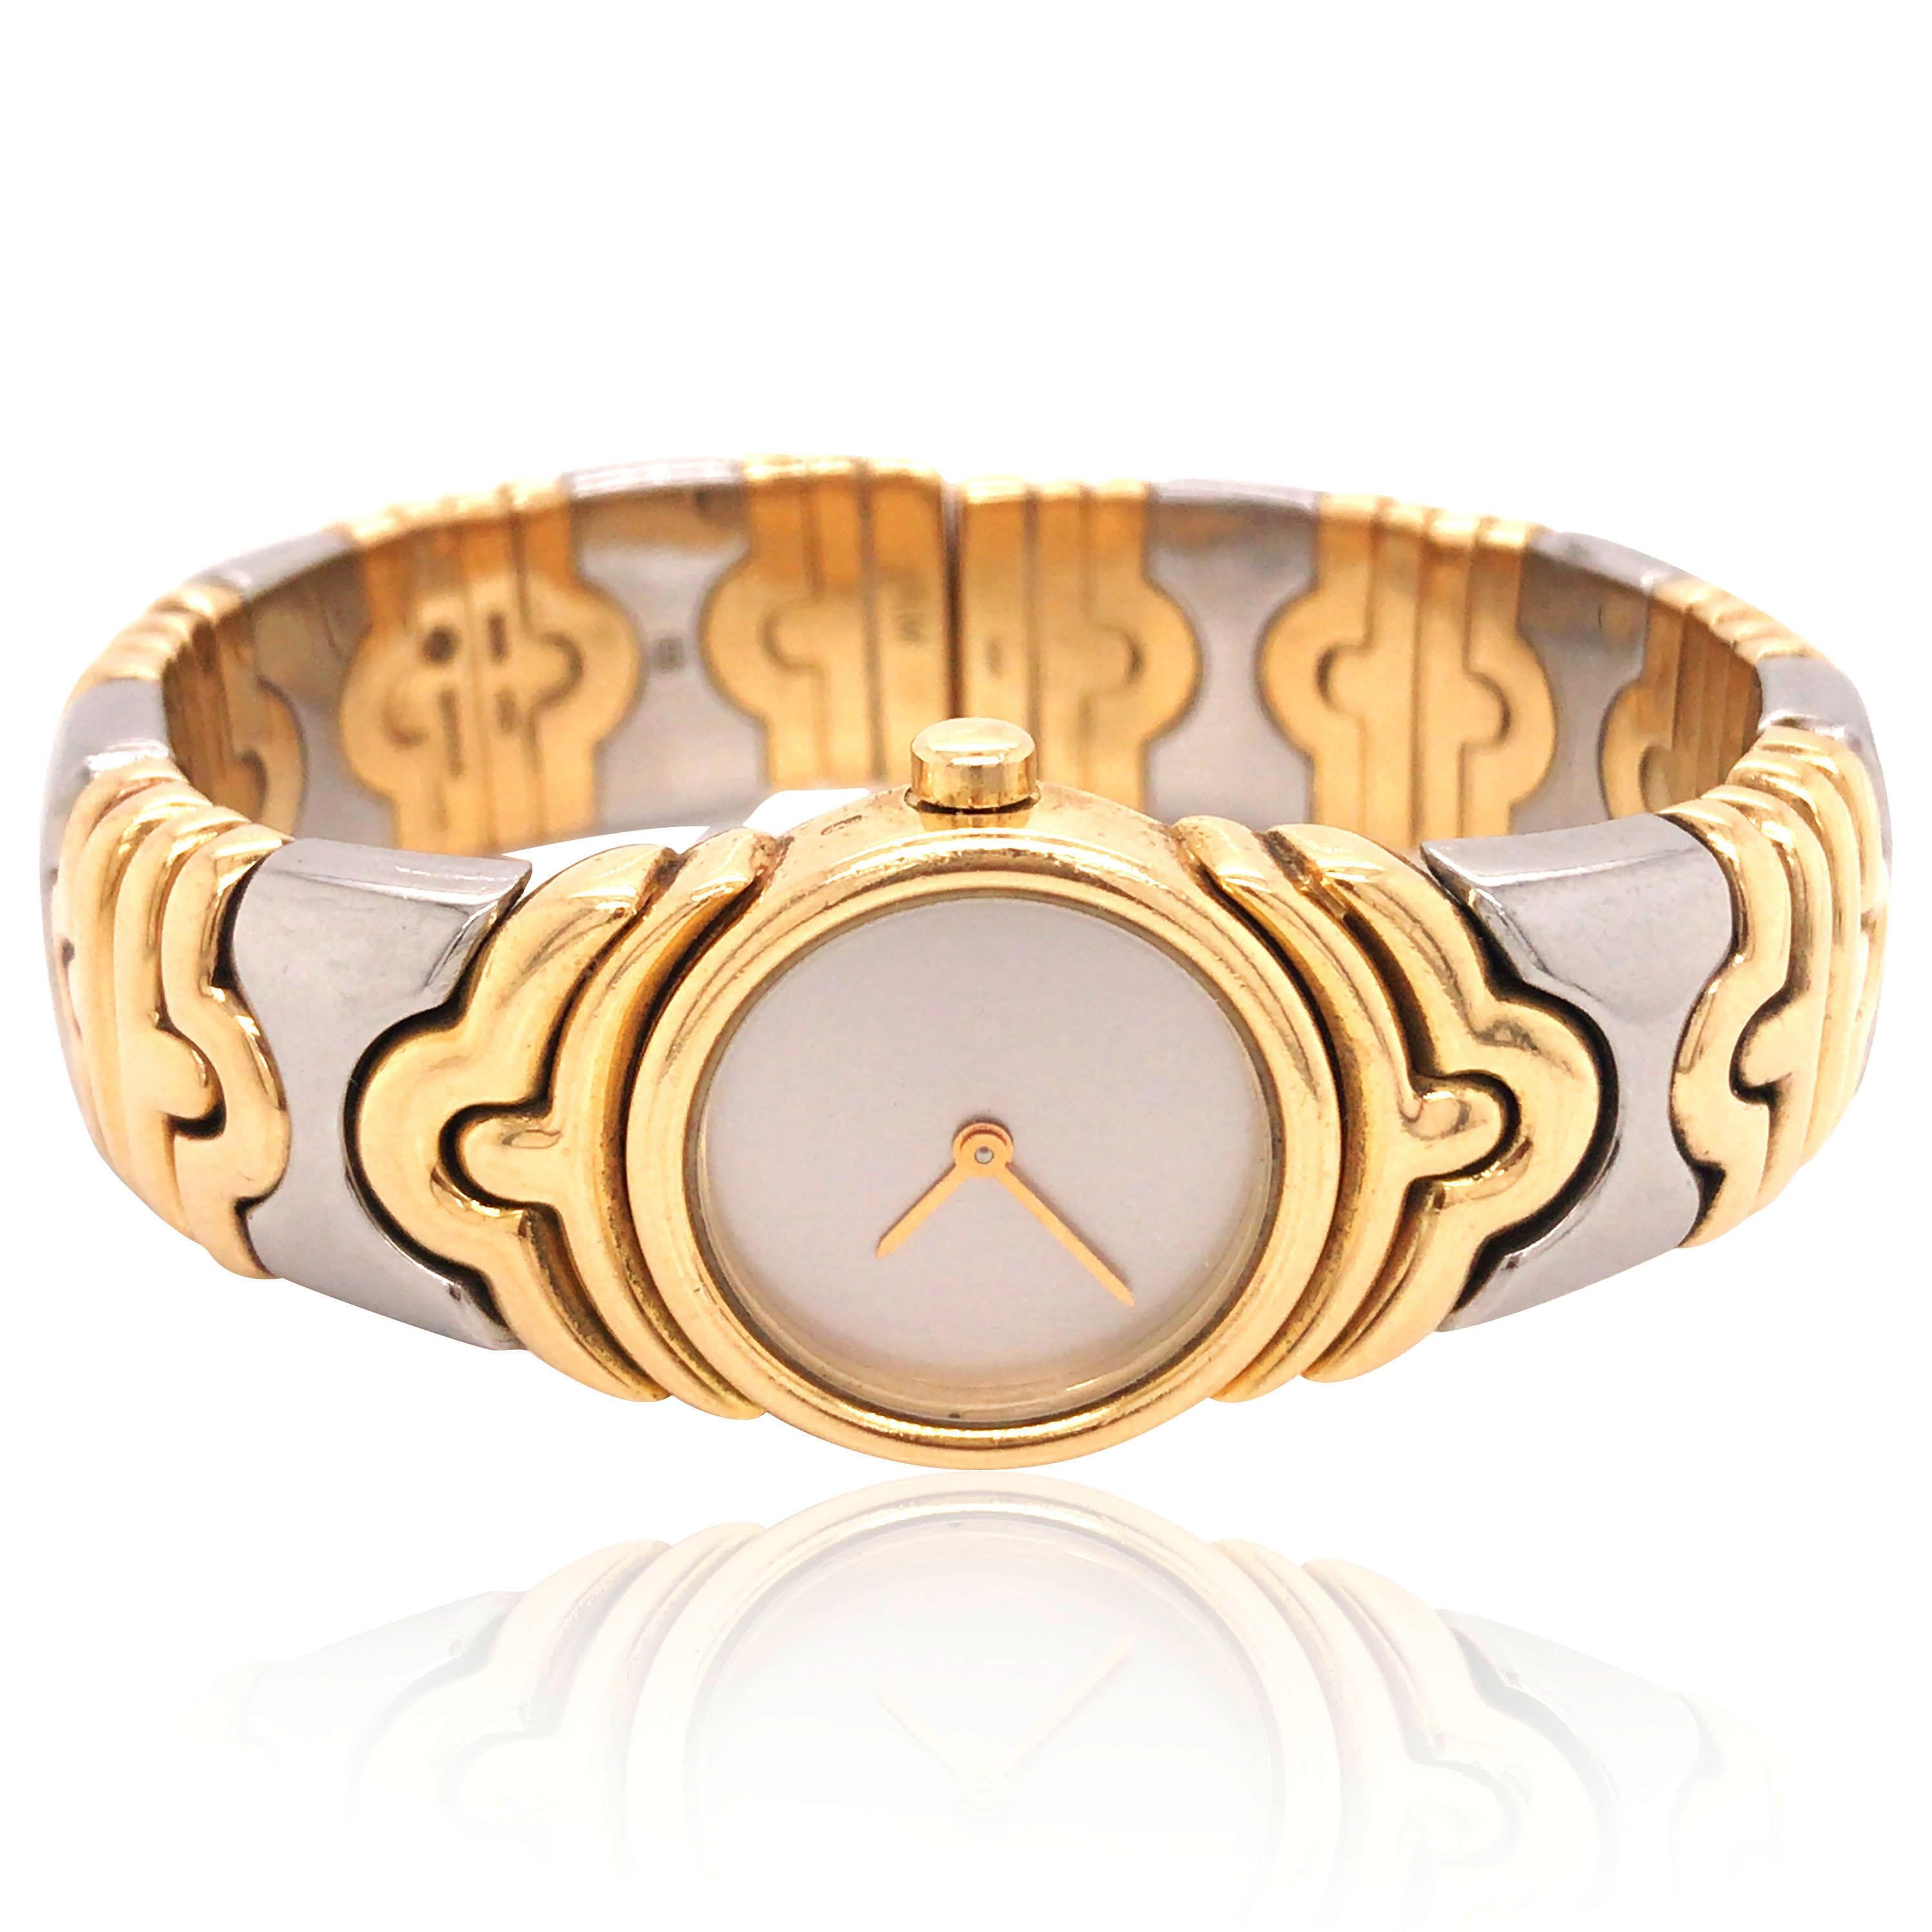 Bvlgari, 18K Gold Steel Quartz Watch In Good Condition For Sale In New York, NY